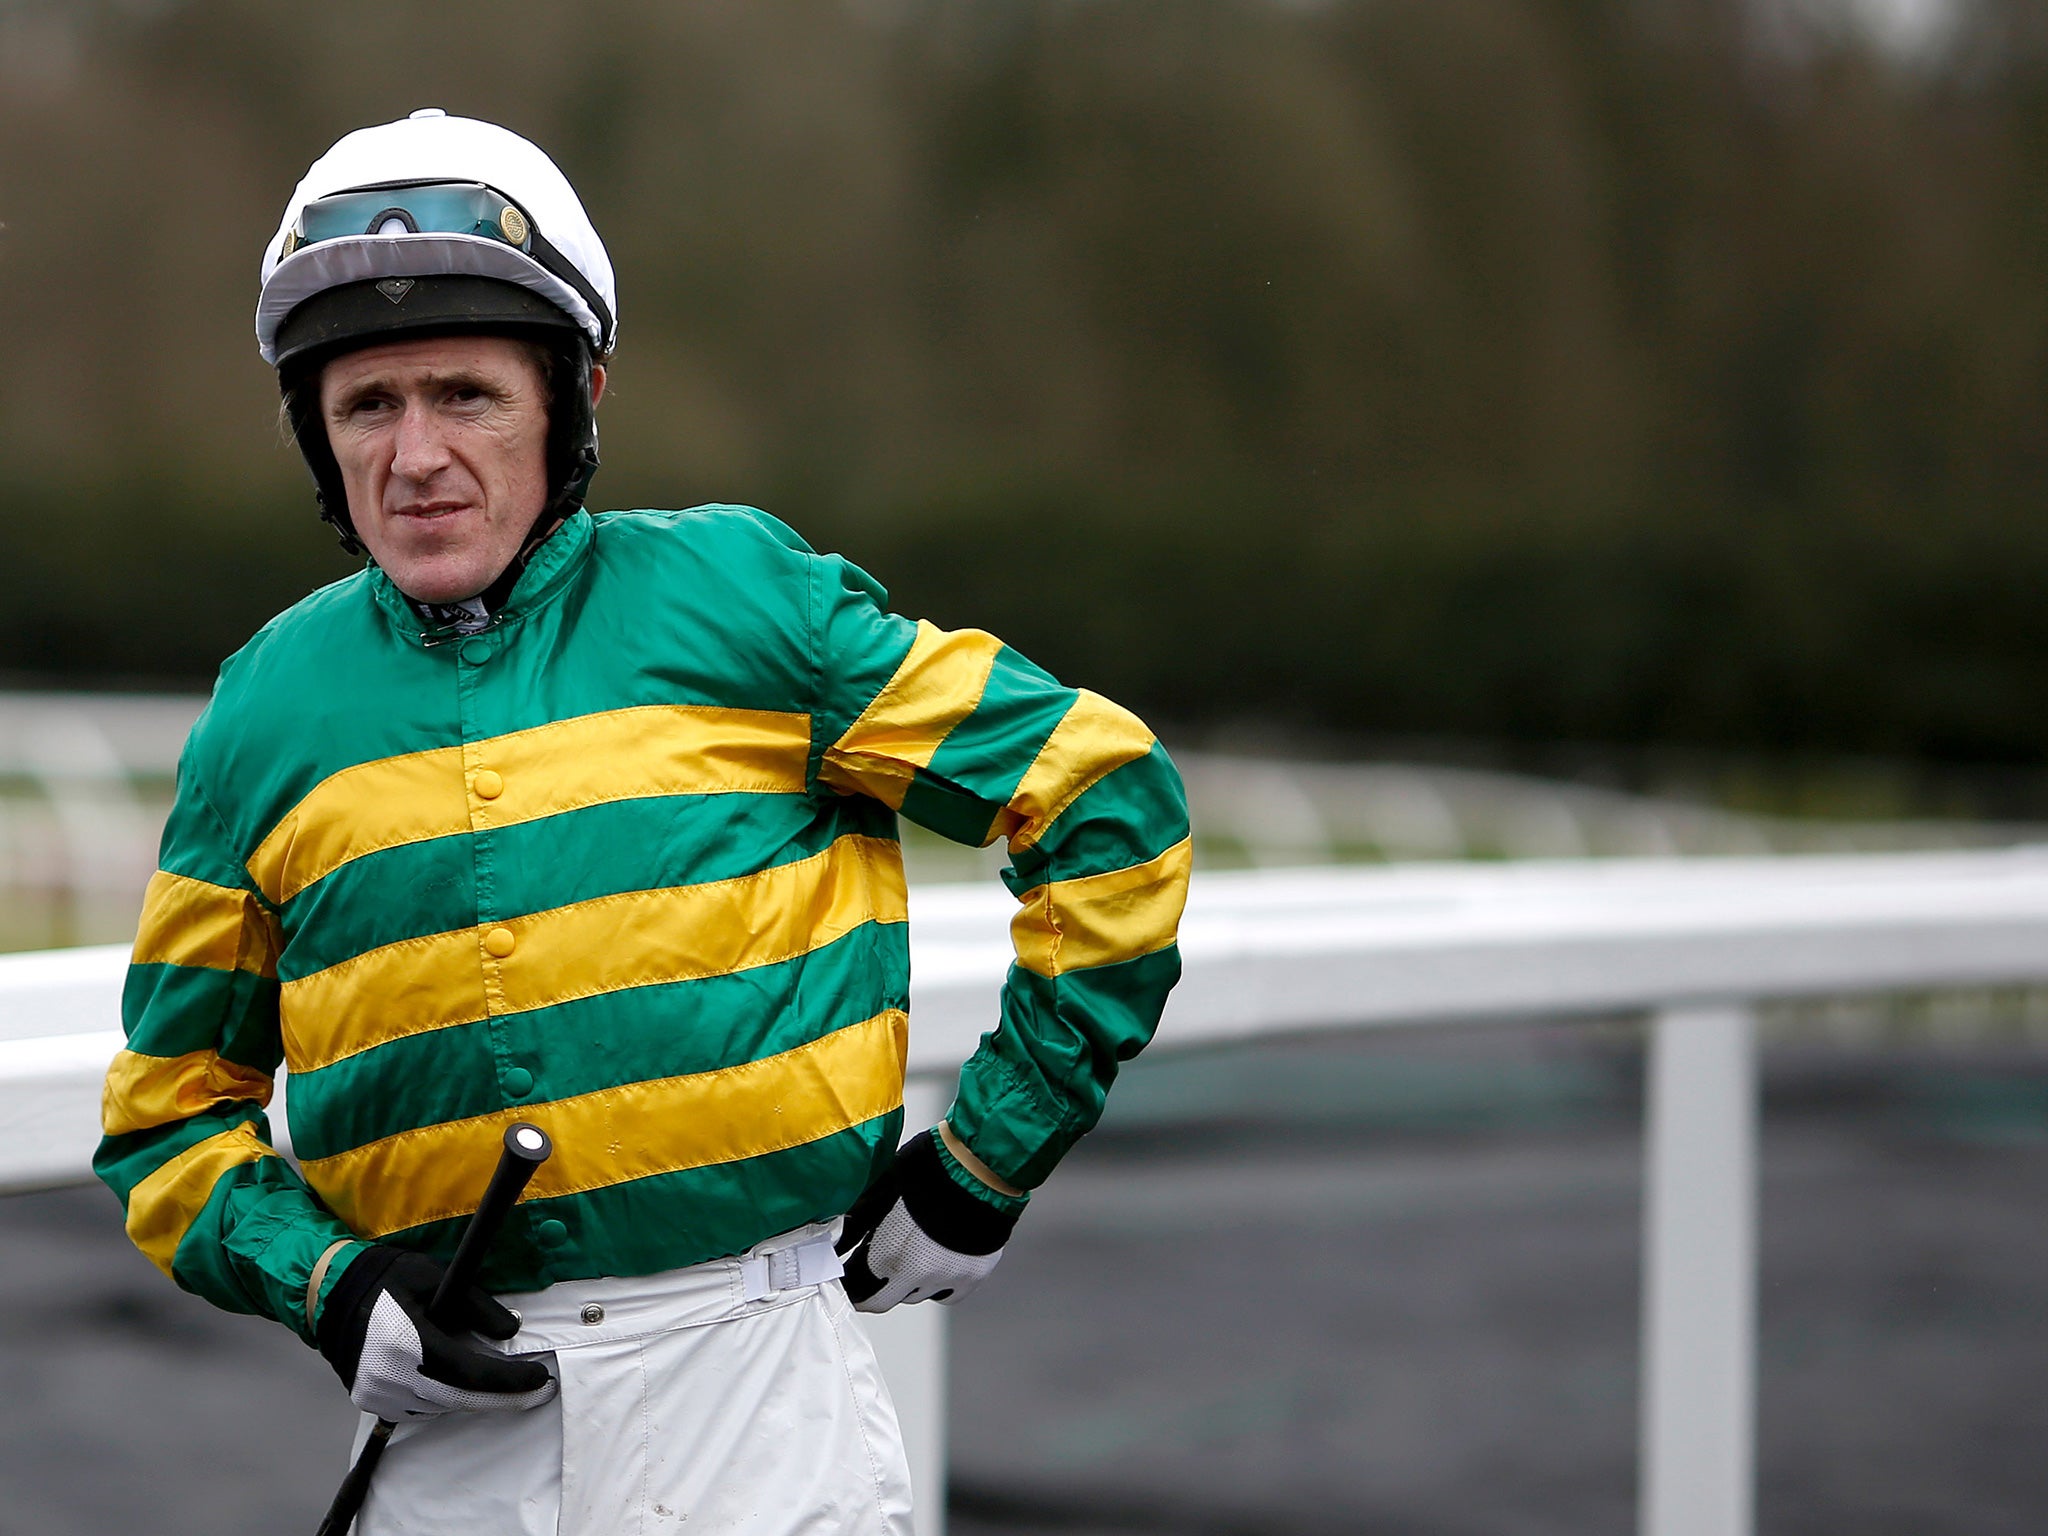 Tony McCoy has two rides on his retirement day, both in the green and gold of J P McManus